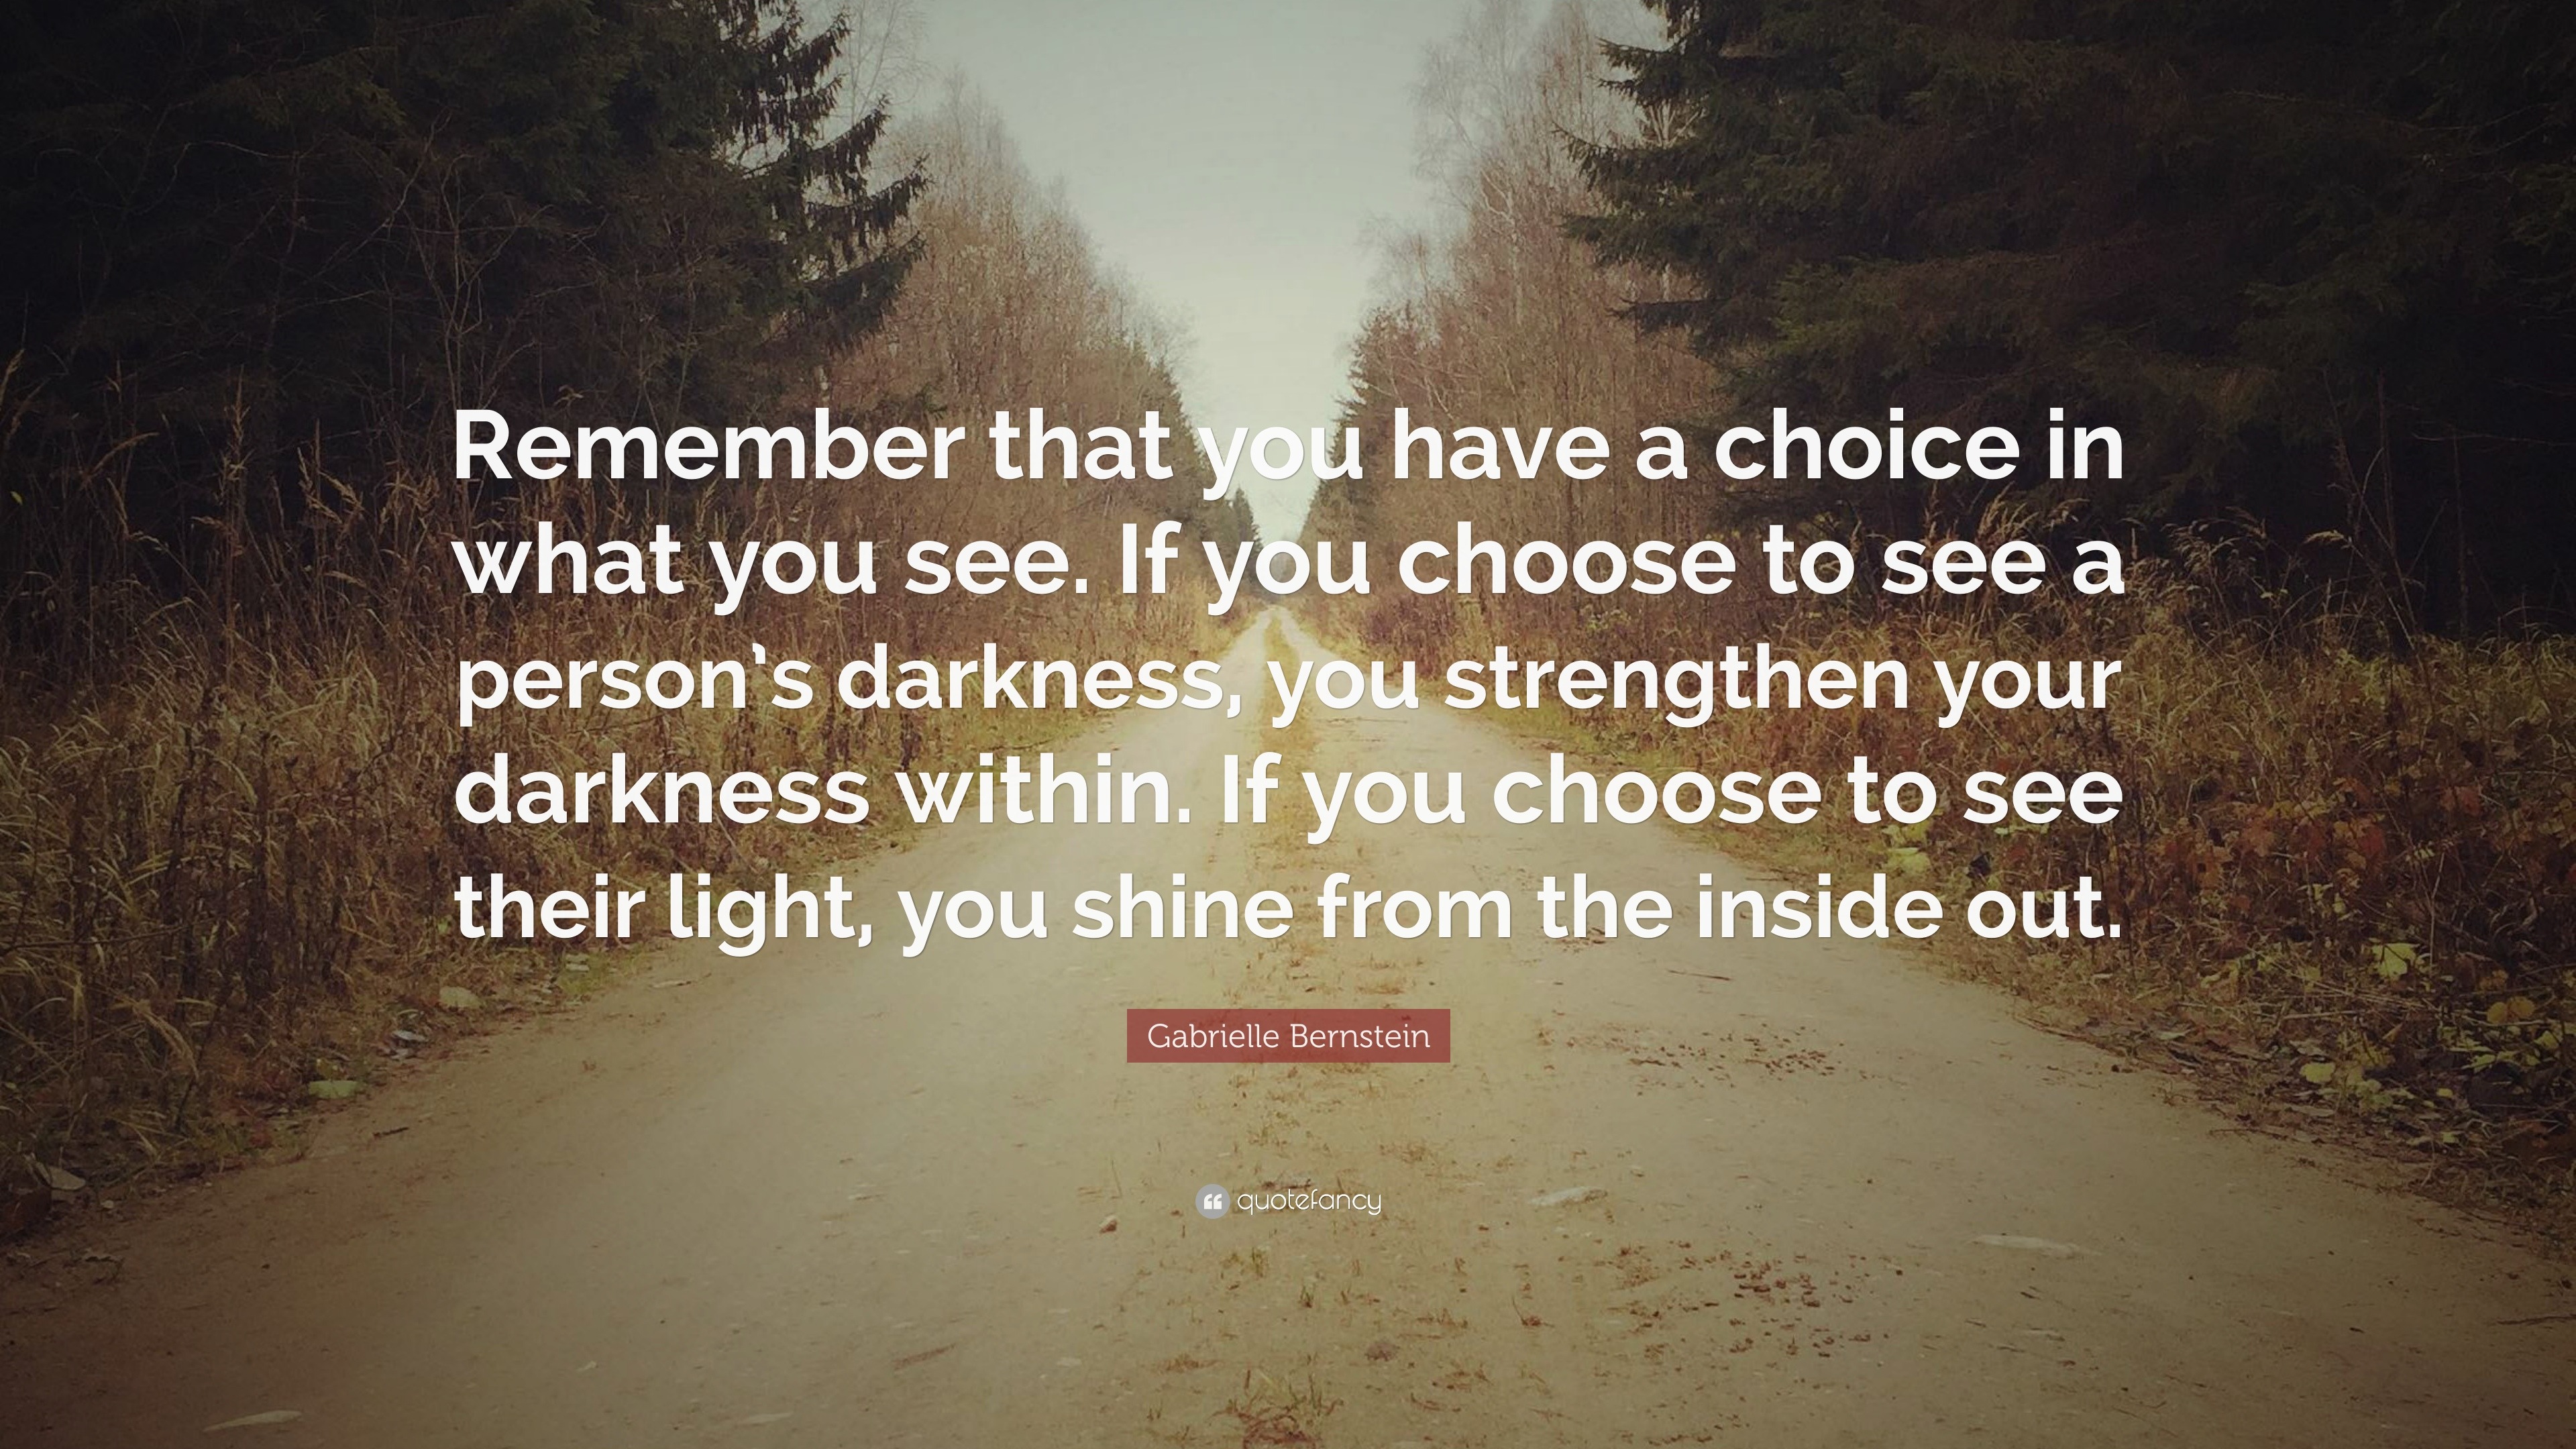 Gabrielle Bernstein Quote: “Remember that you have a choice in what you